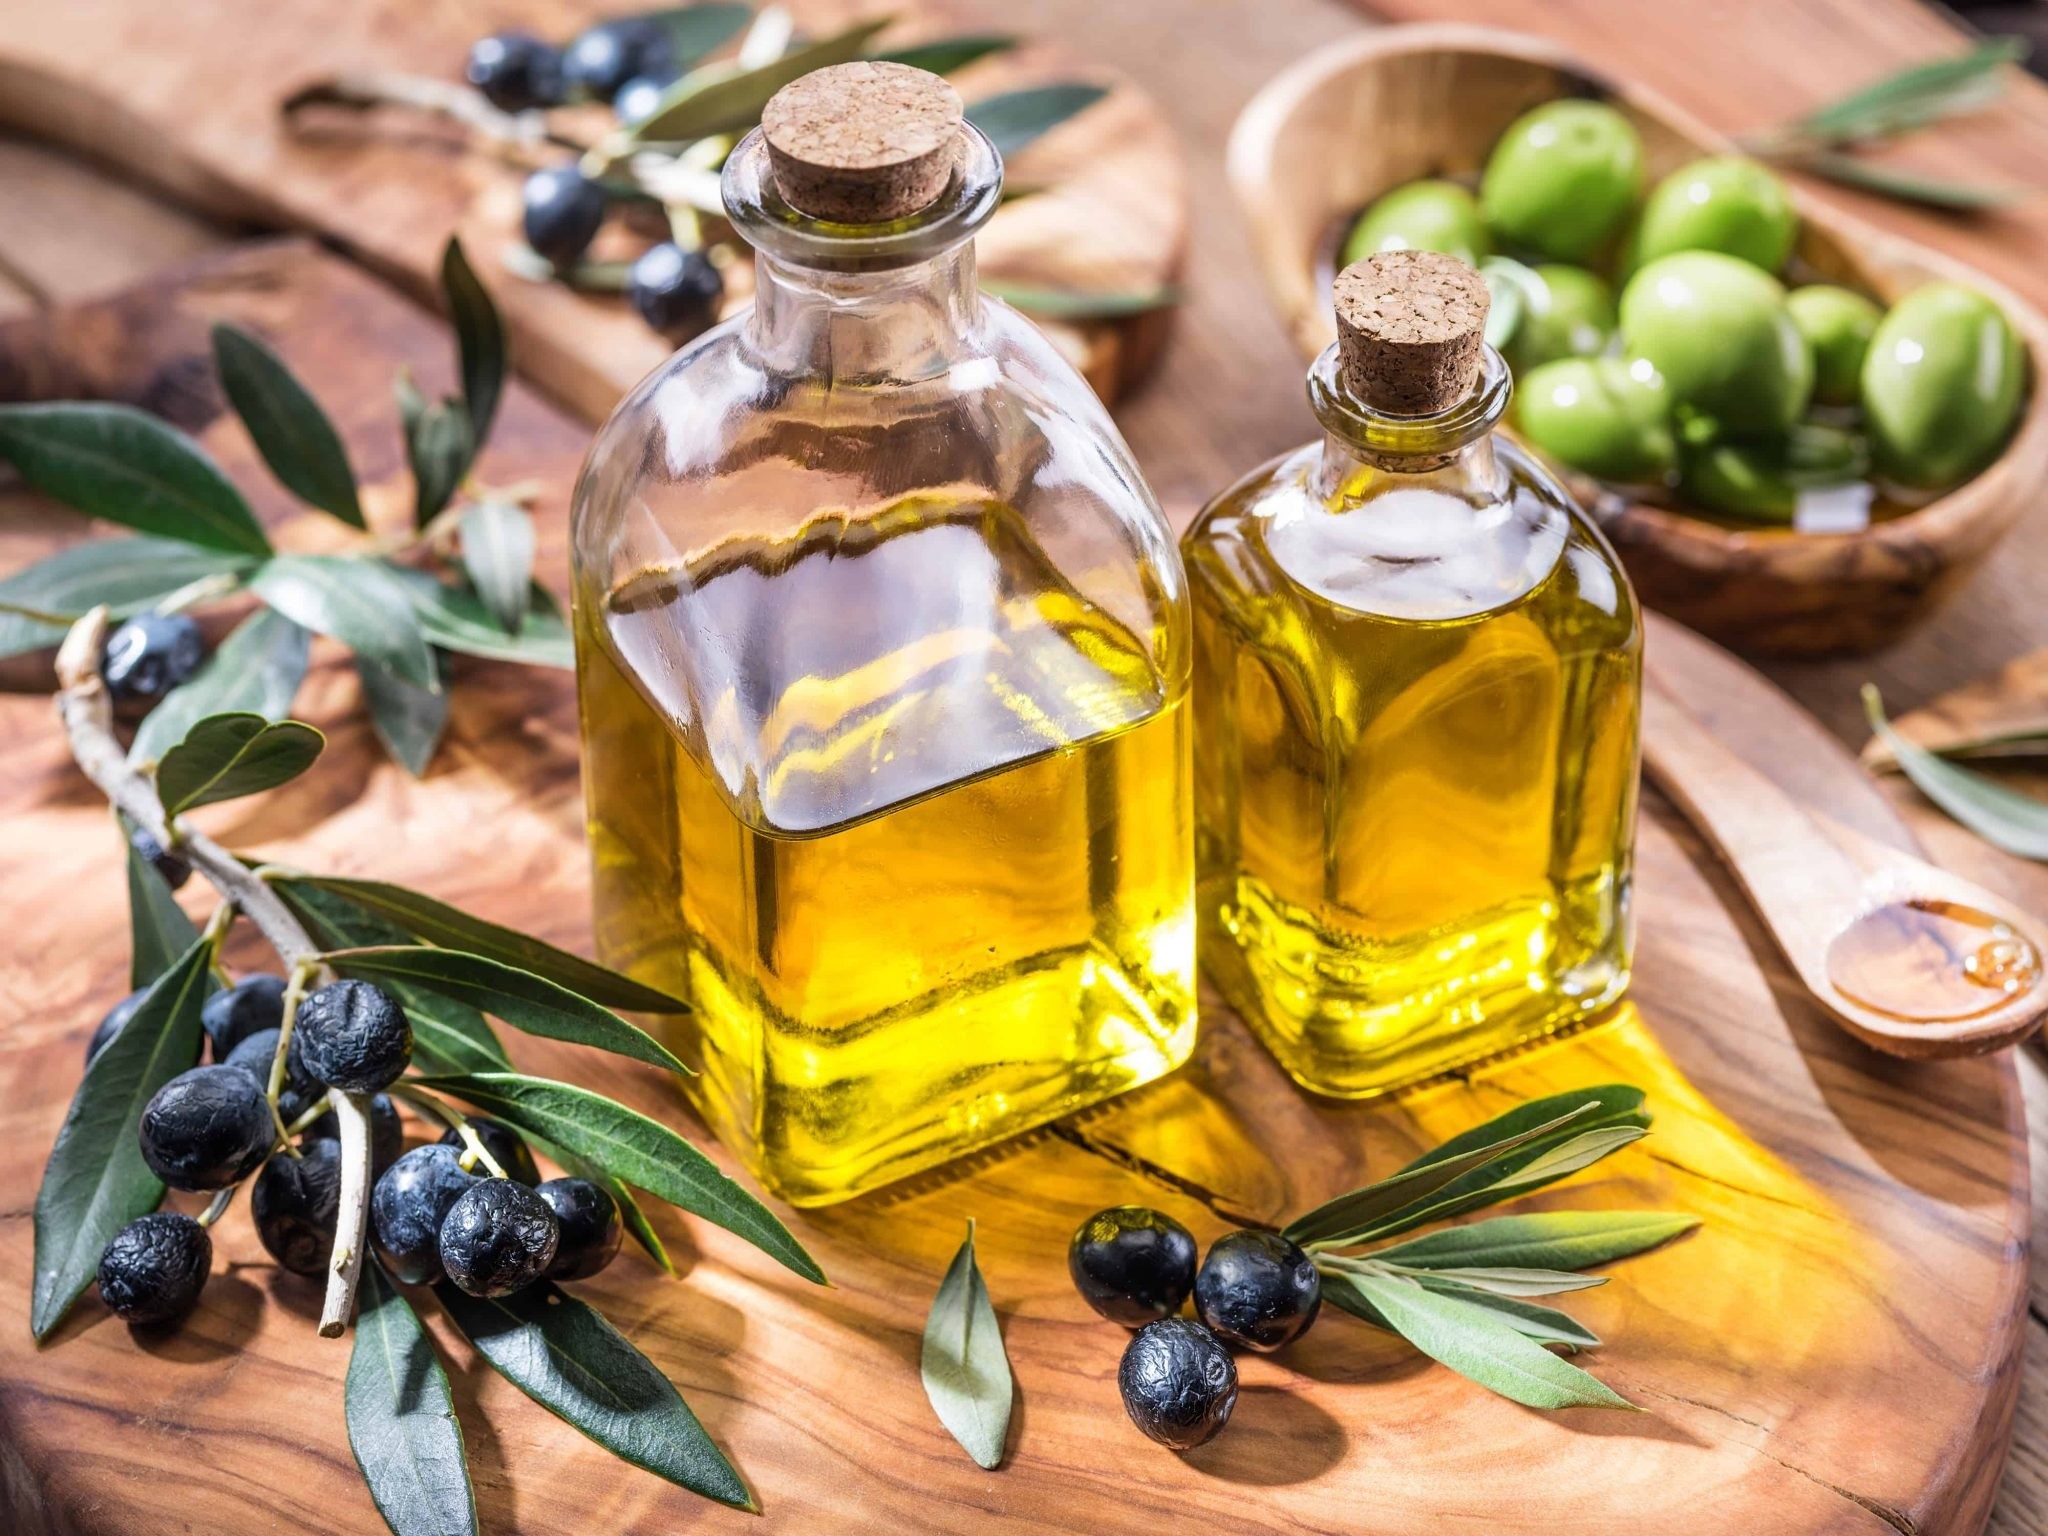 Olive Oil 101 with Sharon Streb